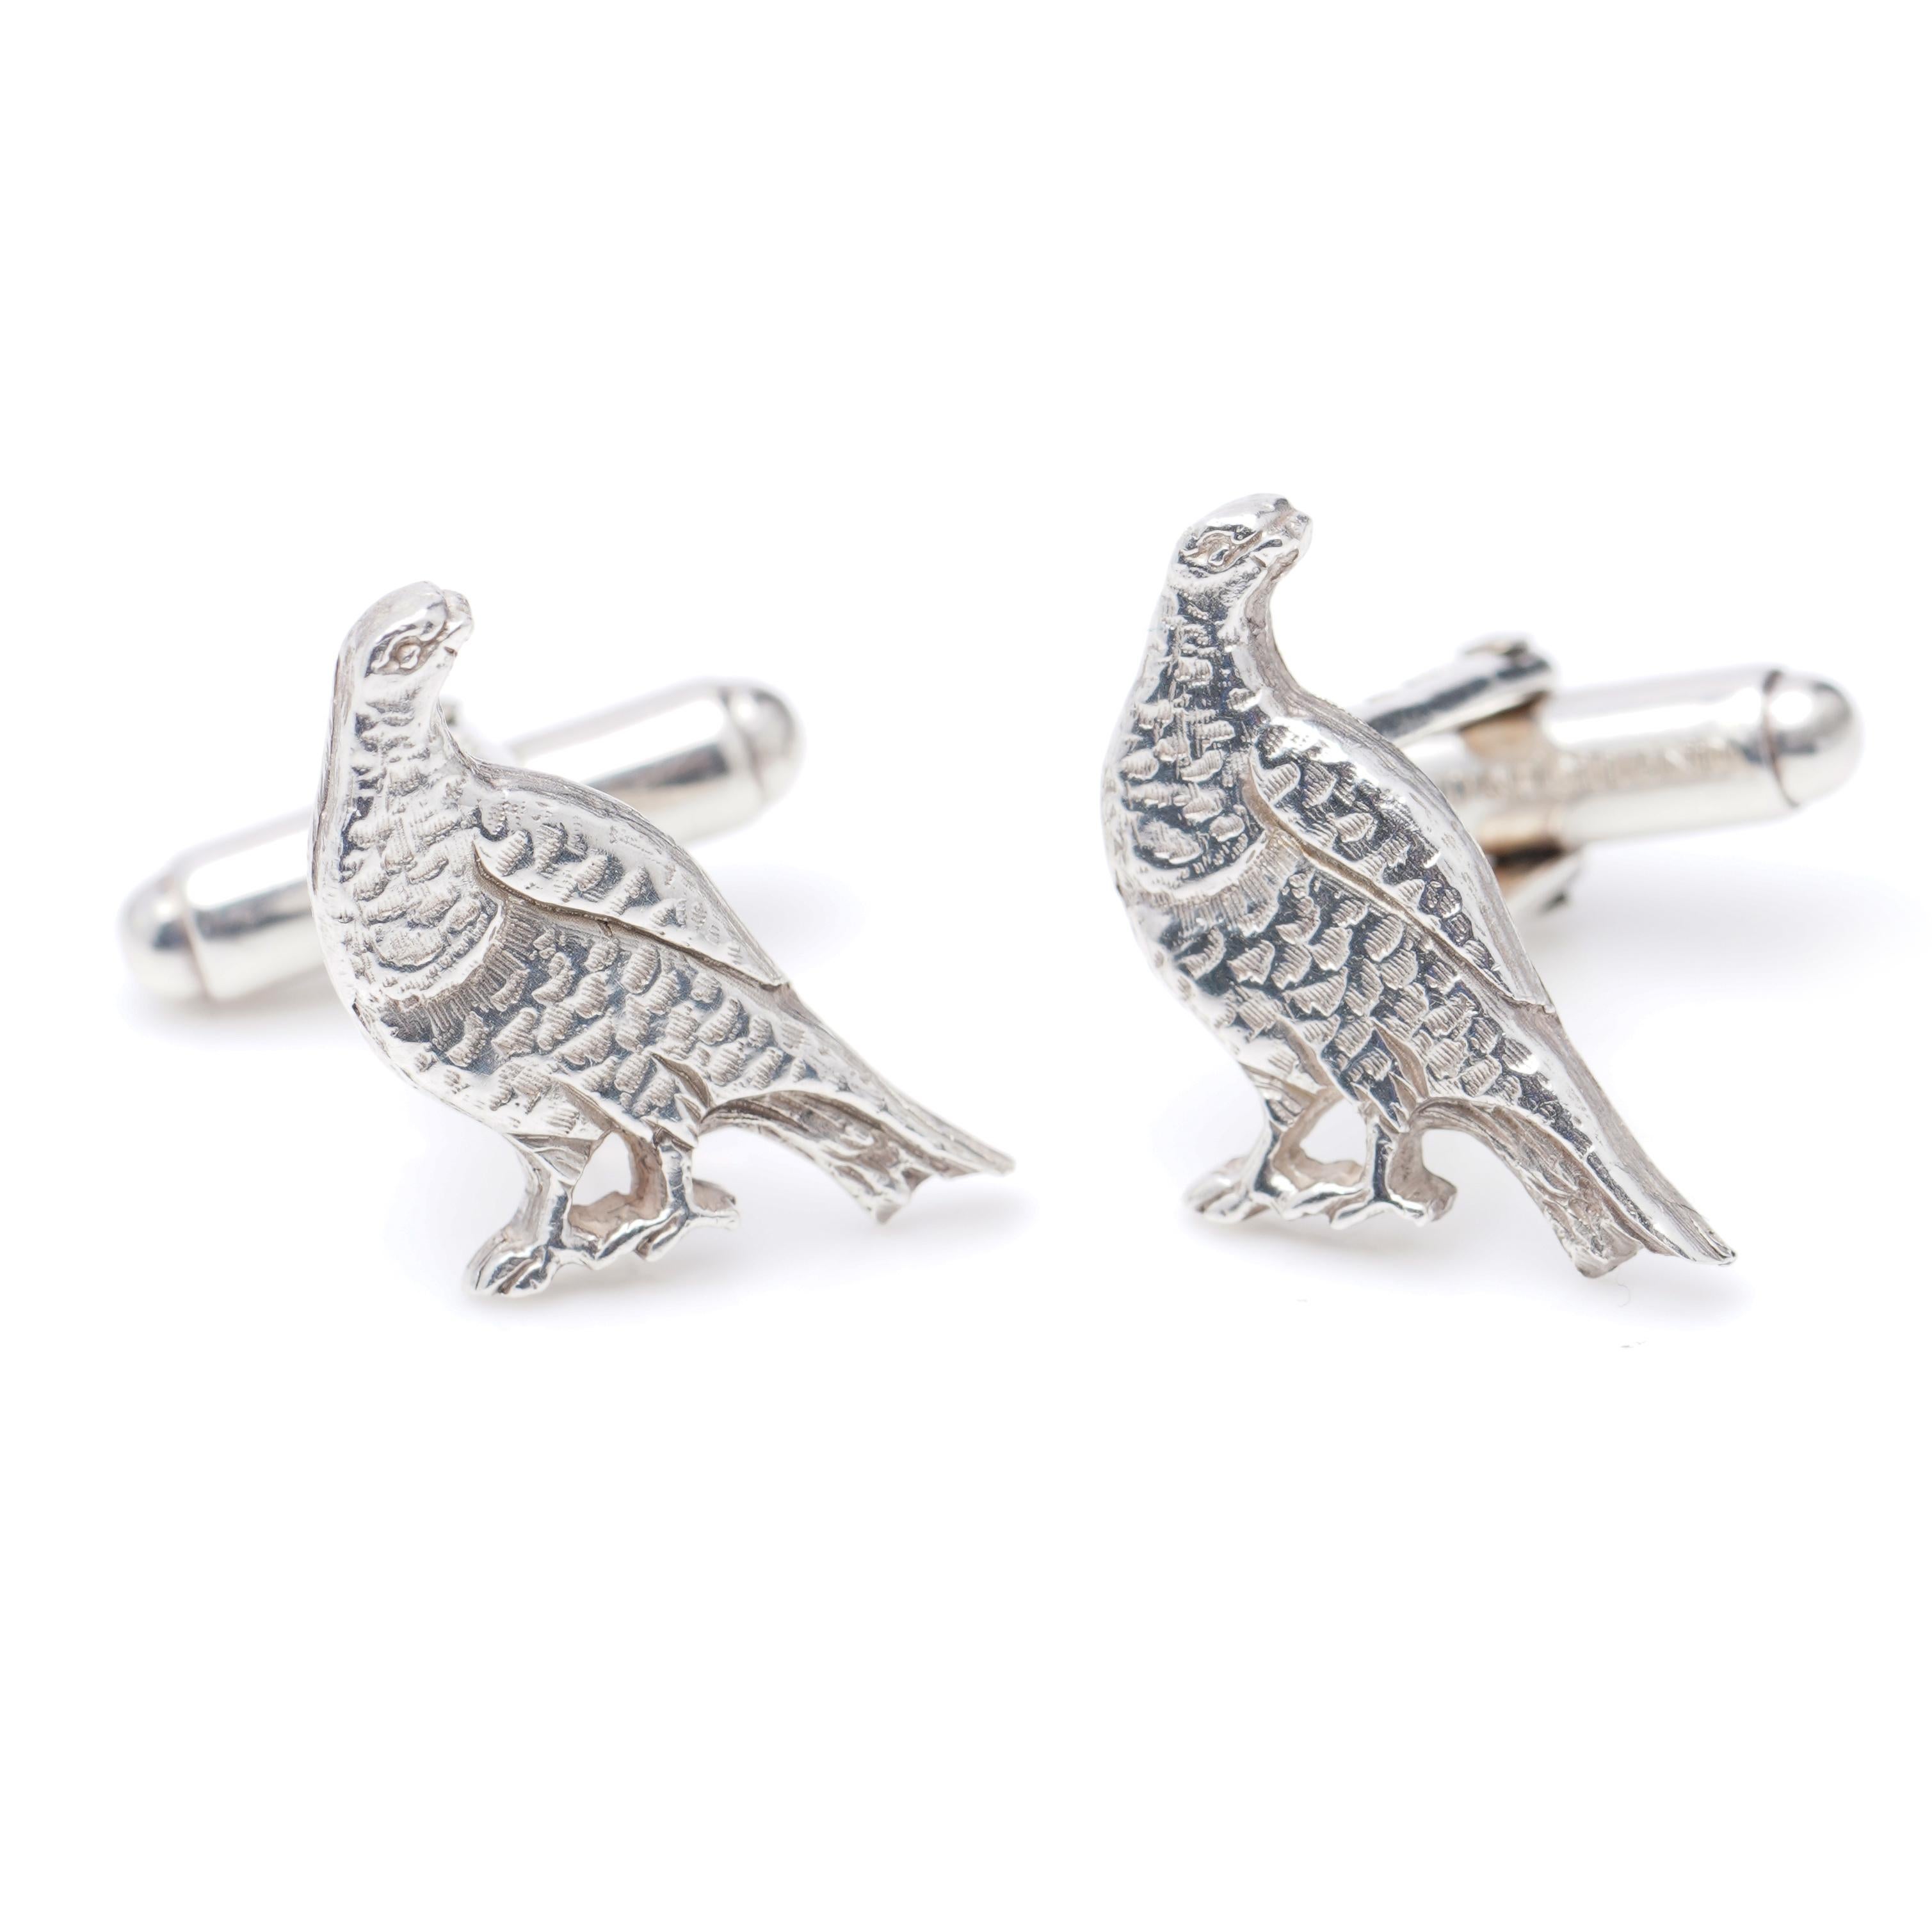 Holland & Holland Sterling Silver Pair of Pheasant Cufflinks 3